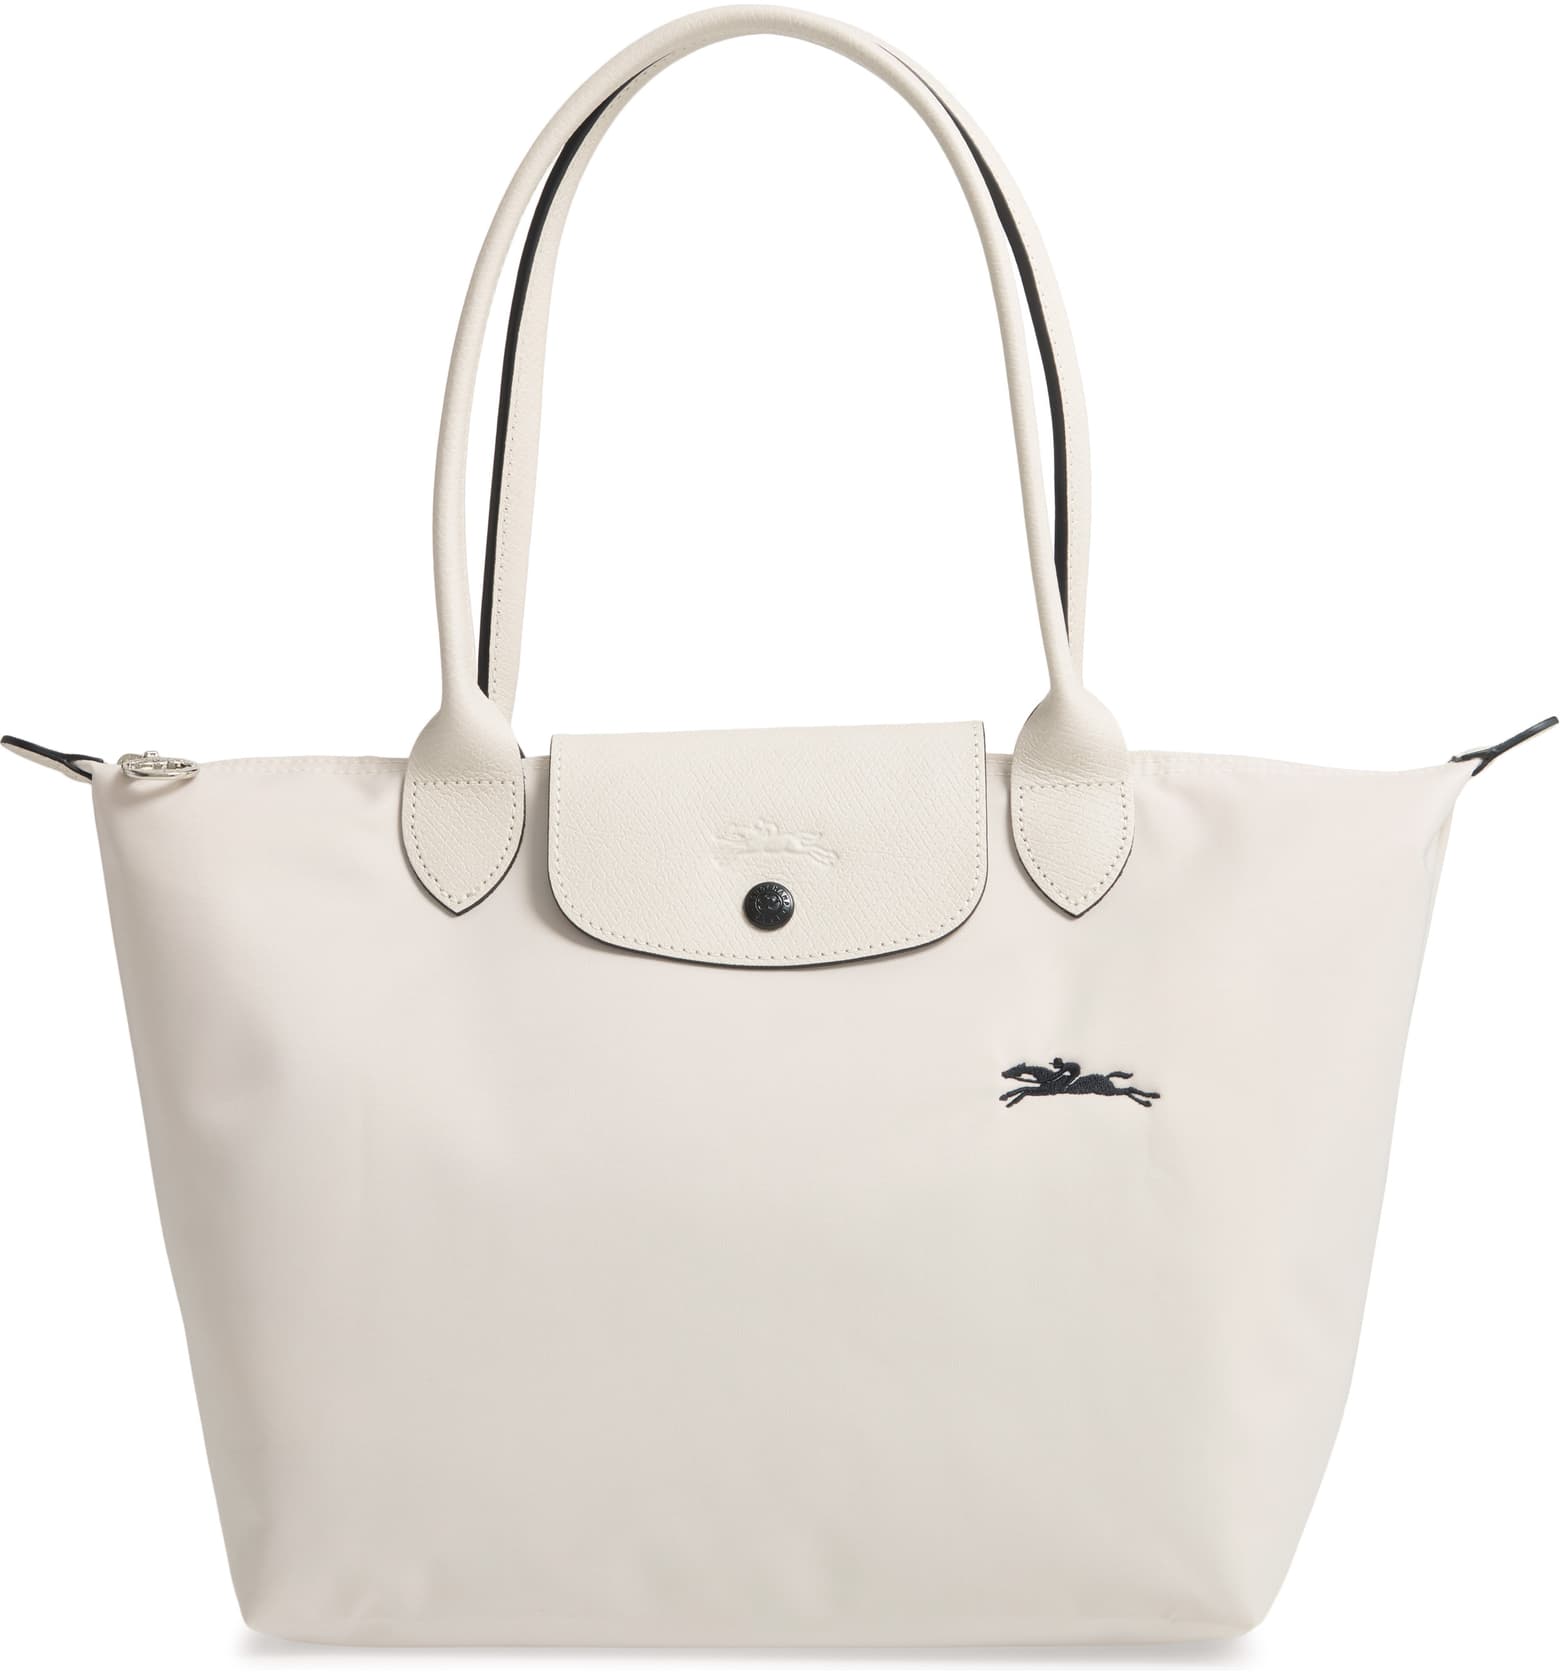 Tote Designer By Longchamp Size: Medium – Clothes Mentor Orland